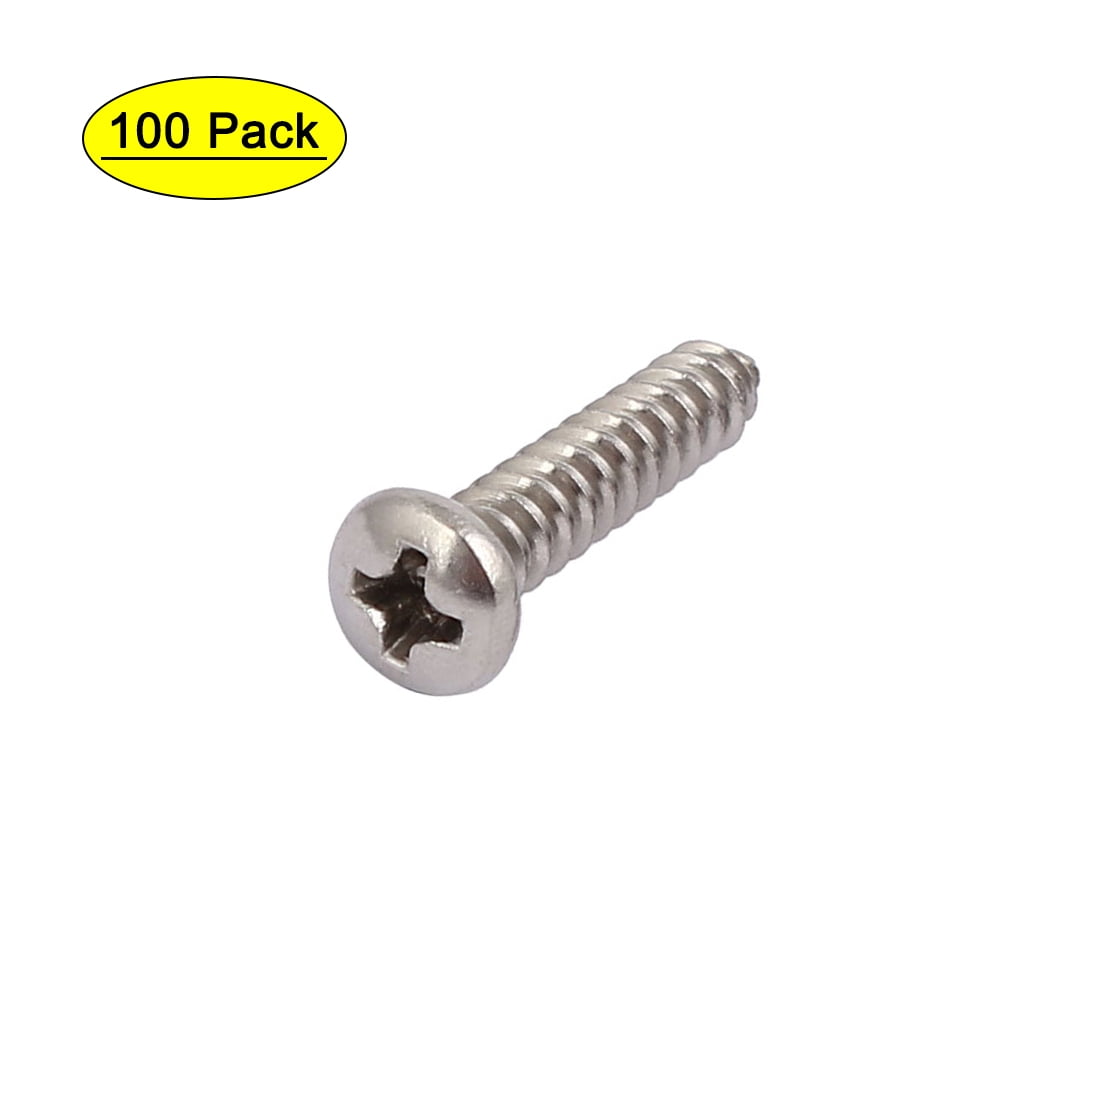 20/100Pcs M4 16/20mm Stainless Steel Phillips Round Pan Head Self Tapping Screw 